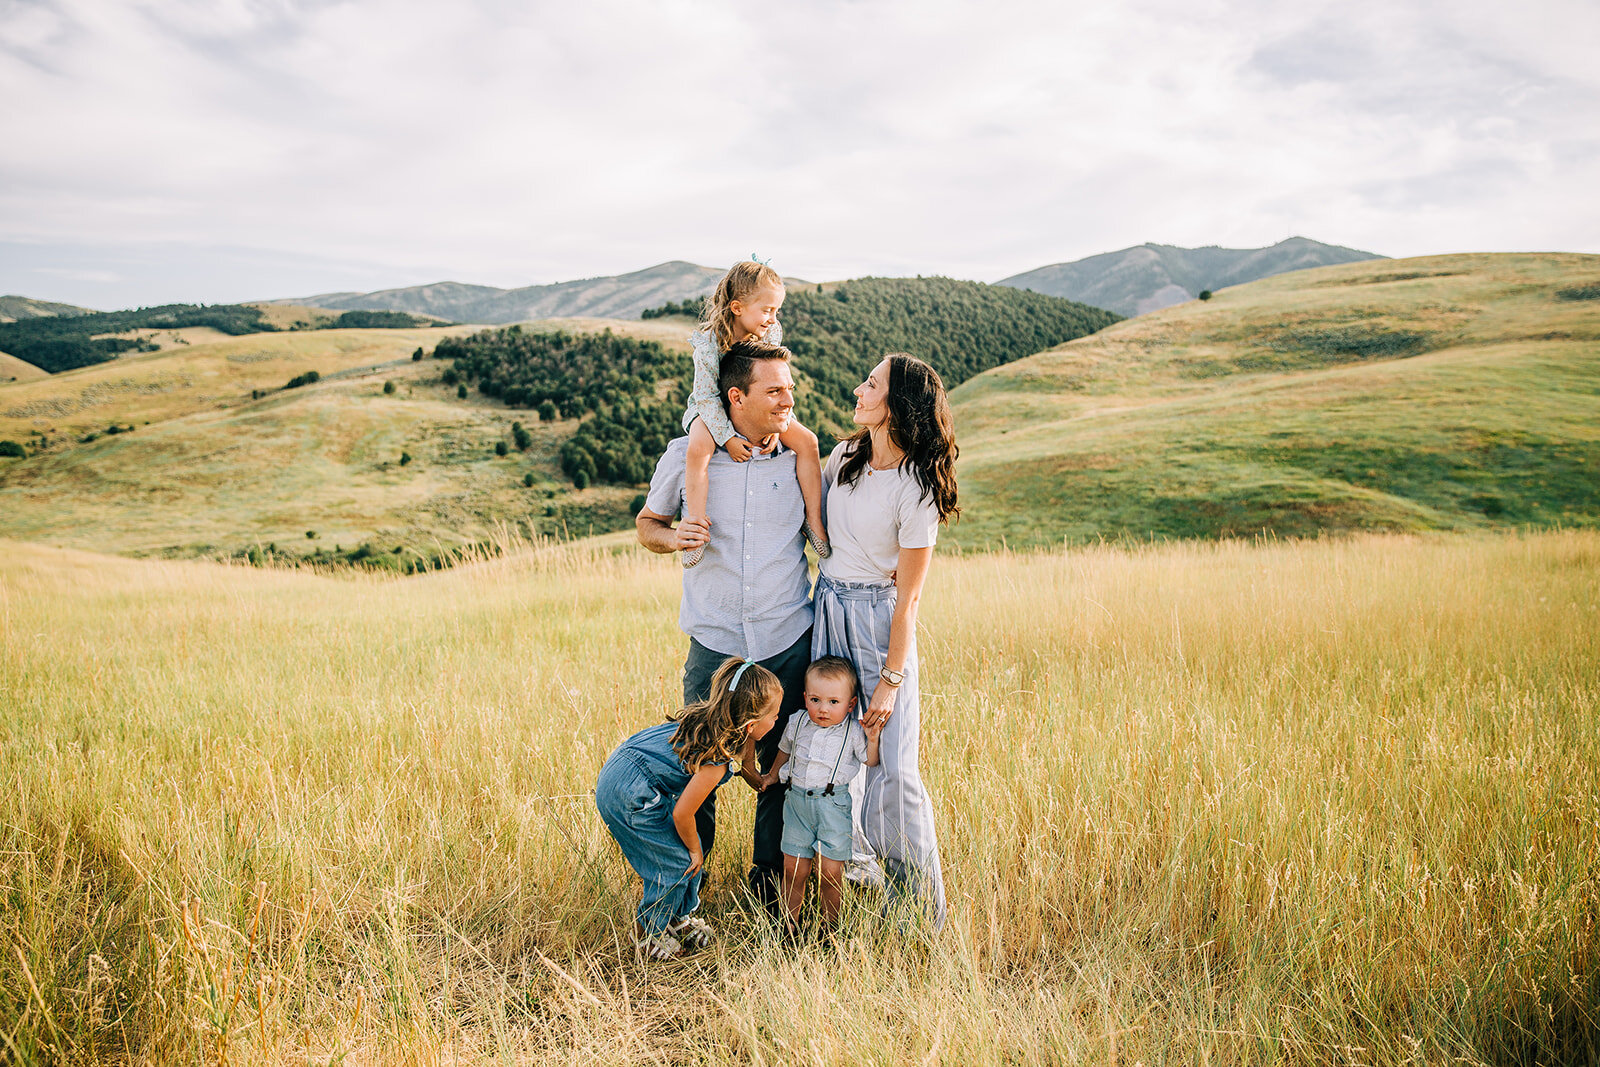  small family in a yellow field with green rolling hills behind paradise utah hyrum utah professional family photographer cache valley shades of blue outfits matching color scheme for summer family photos dad with daughter on his shoulders holding ha